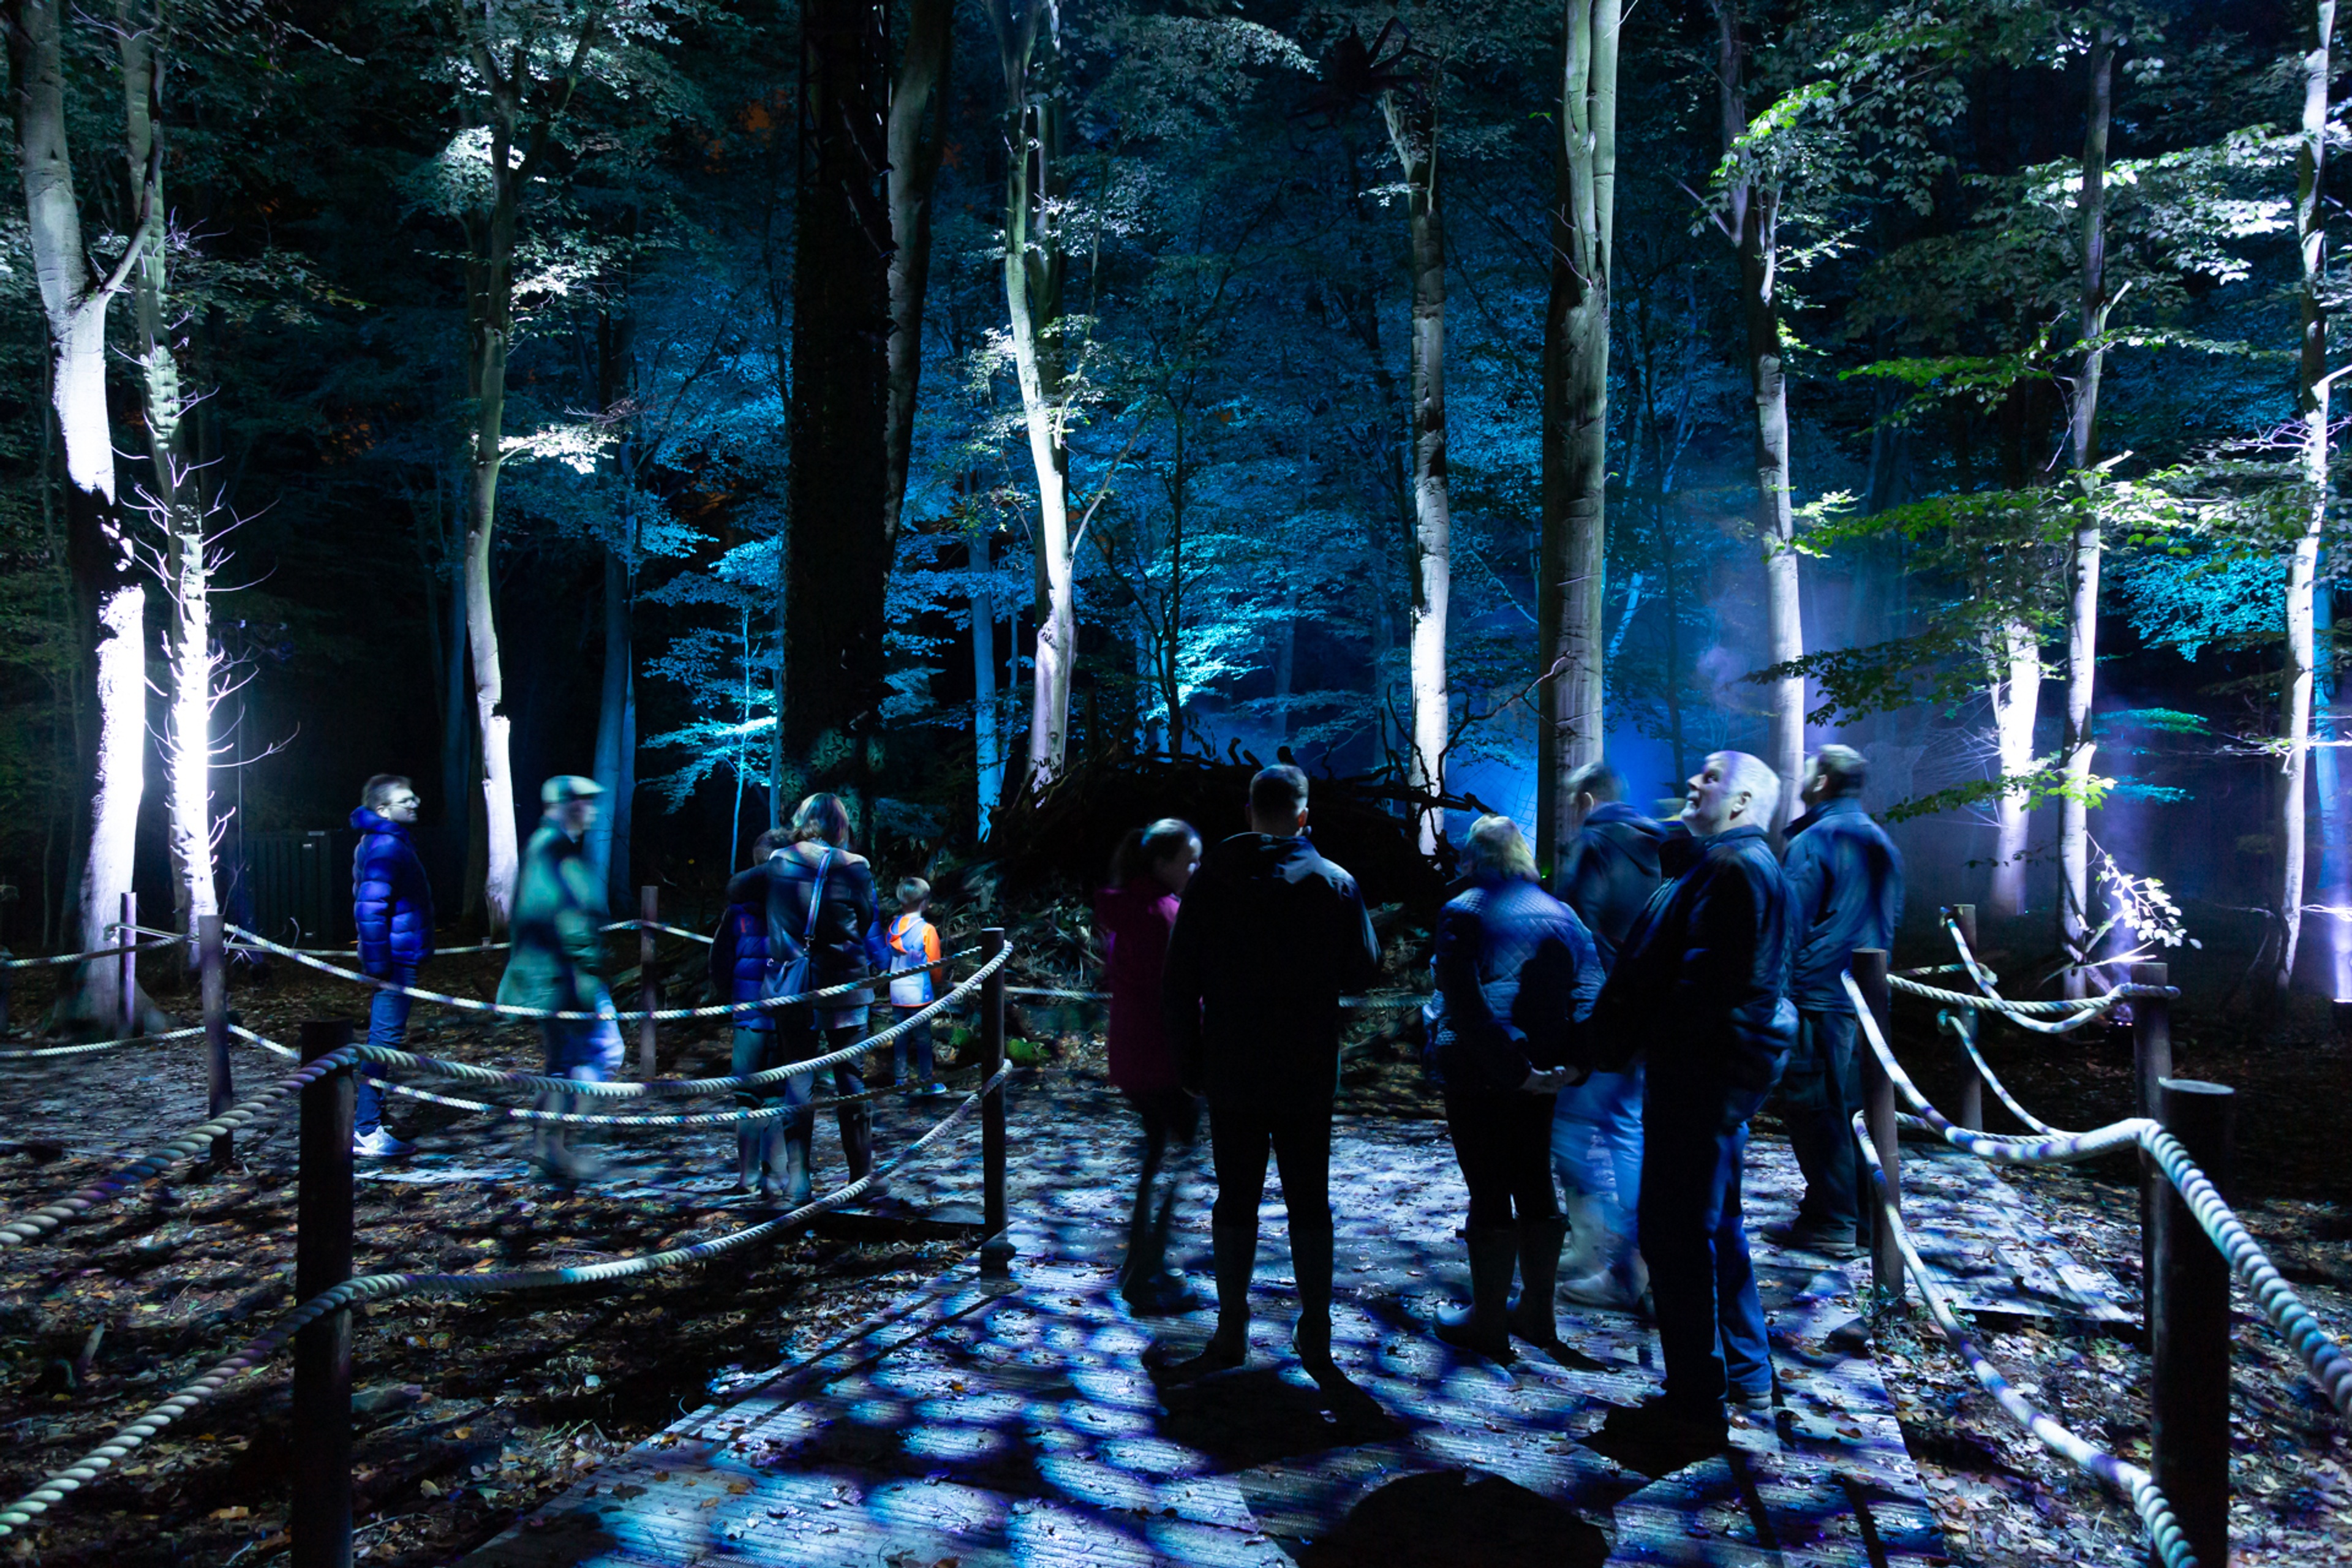 Harry Potter: A Forbidden Forest Experience crowd walking down a pathway in the forest